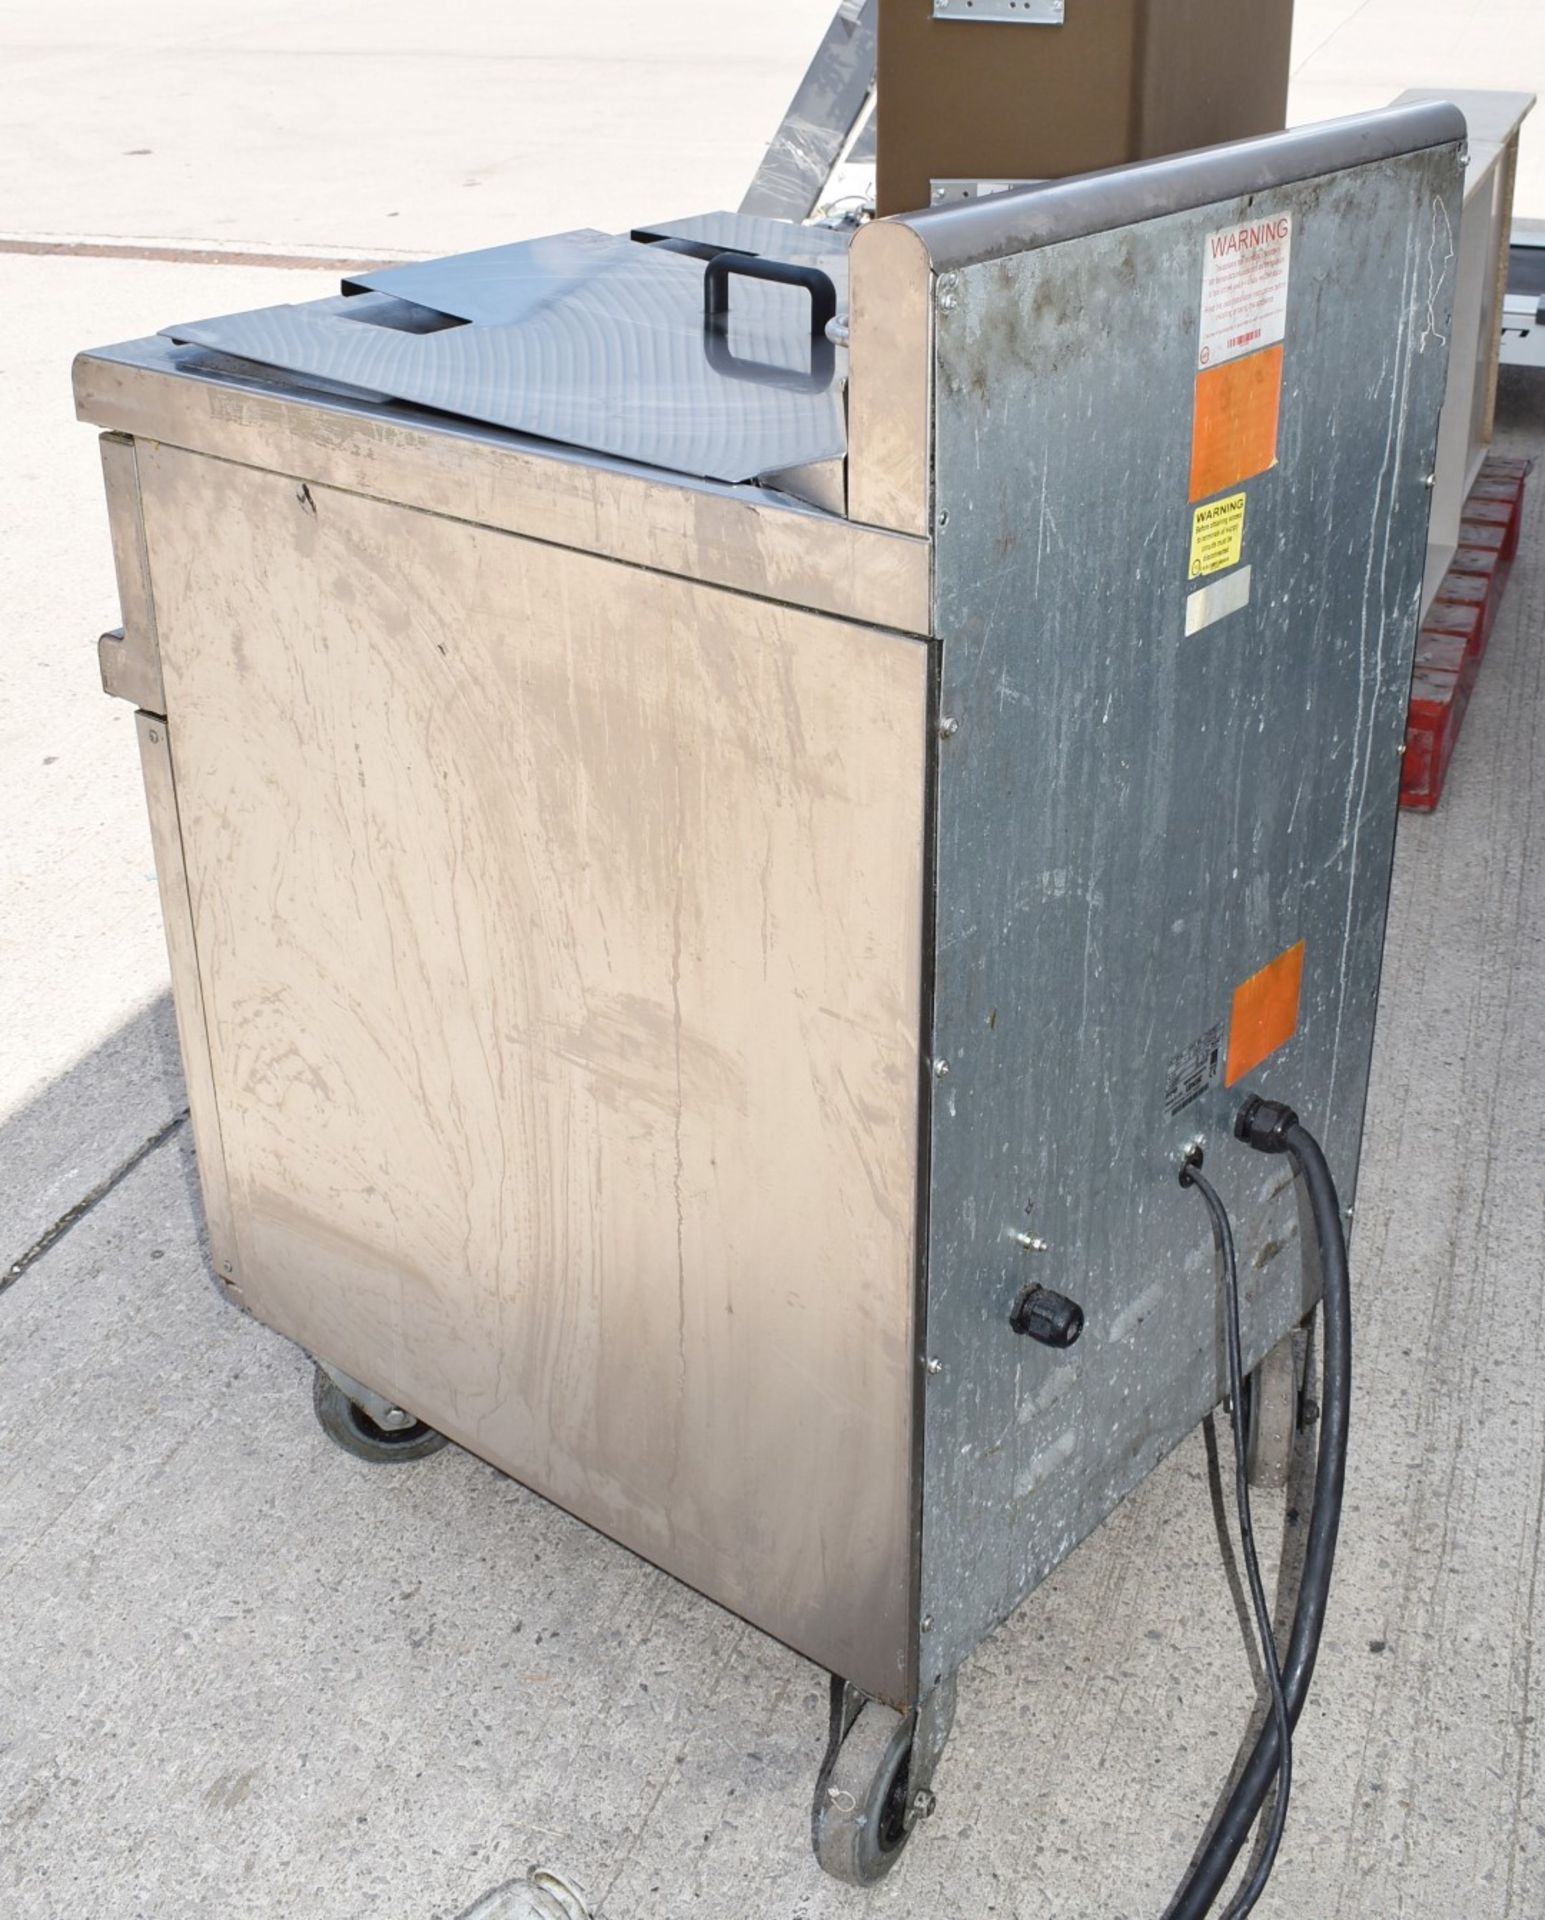 1 x Lincat Opus OE7108 Single Tank Electric Fryer With Filteration - 3 Phase Power - Image 8 of 10